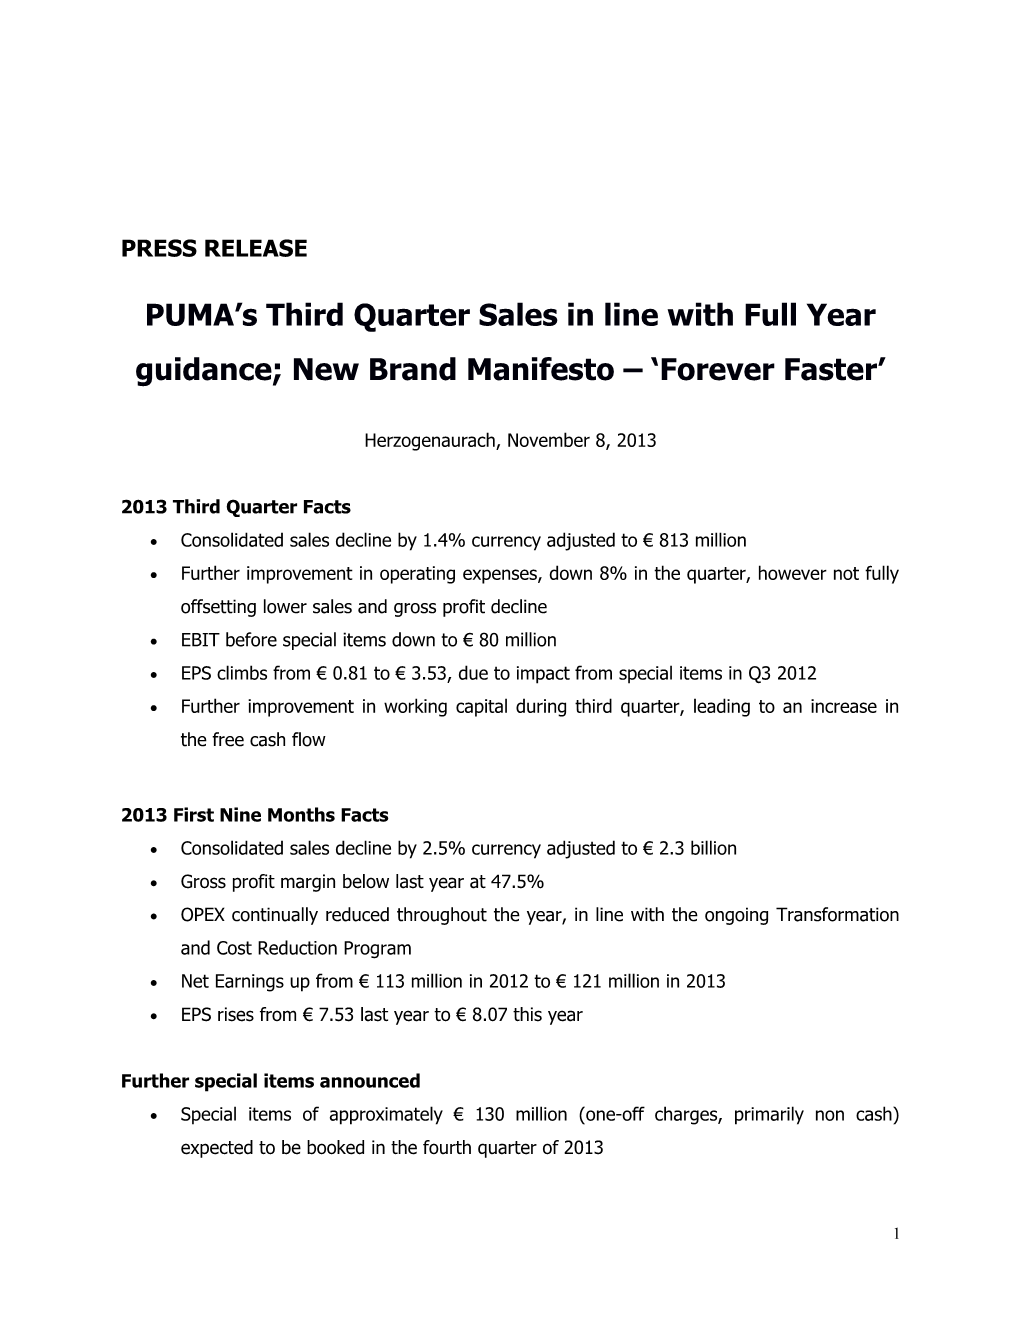 PUMA S Third Quarter Sales in Line with Full Year Guidance; New Brand Manifesto Forever Faster